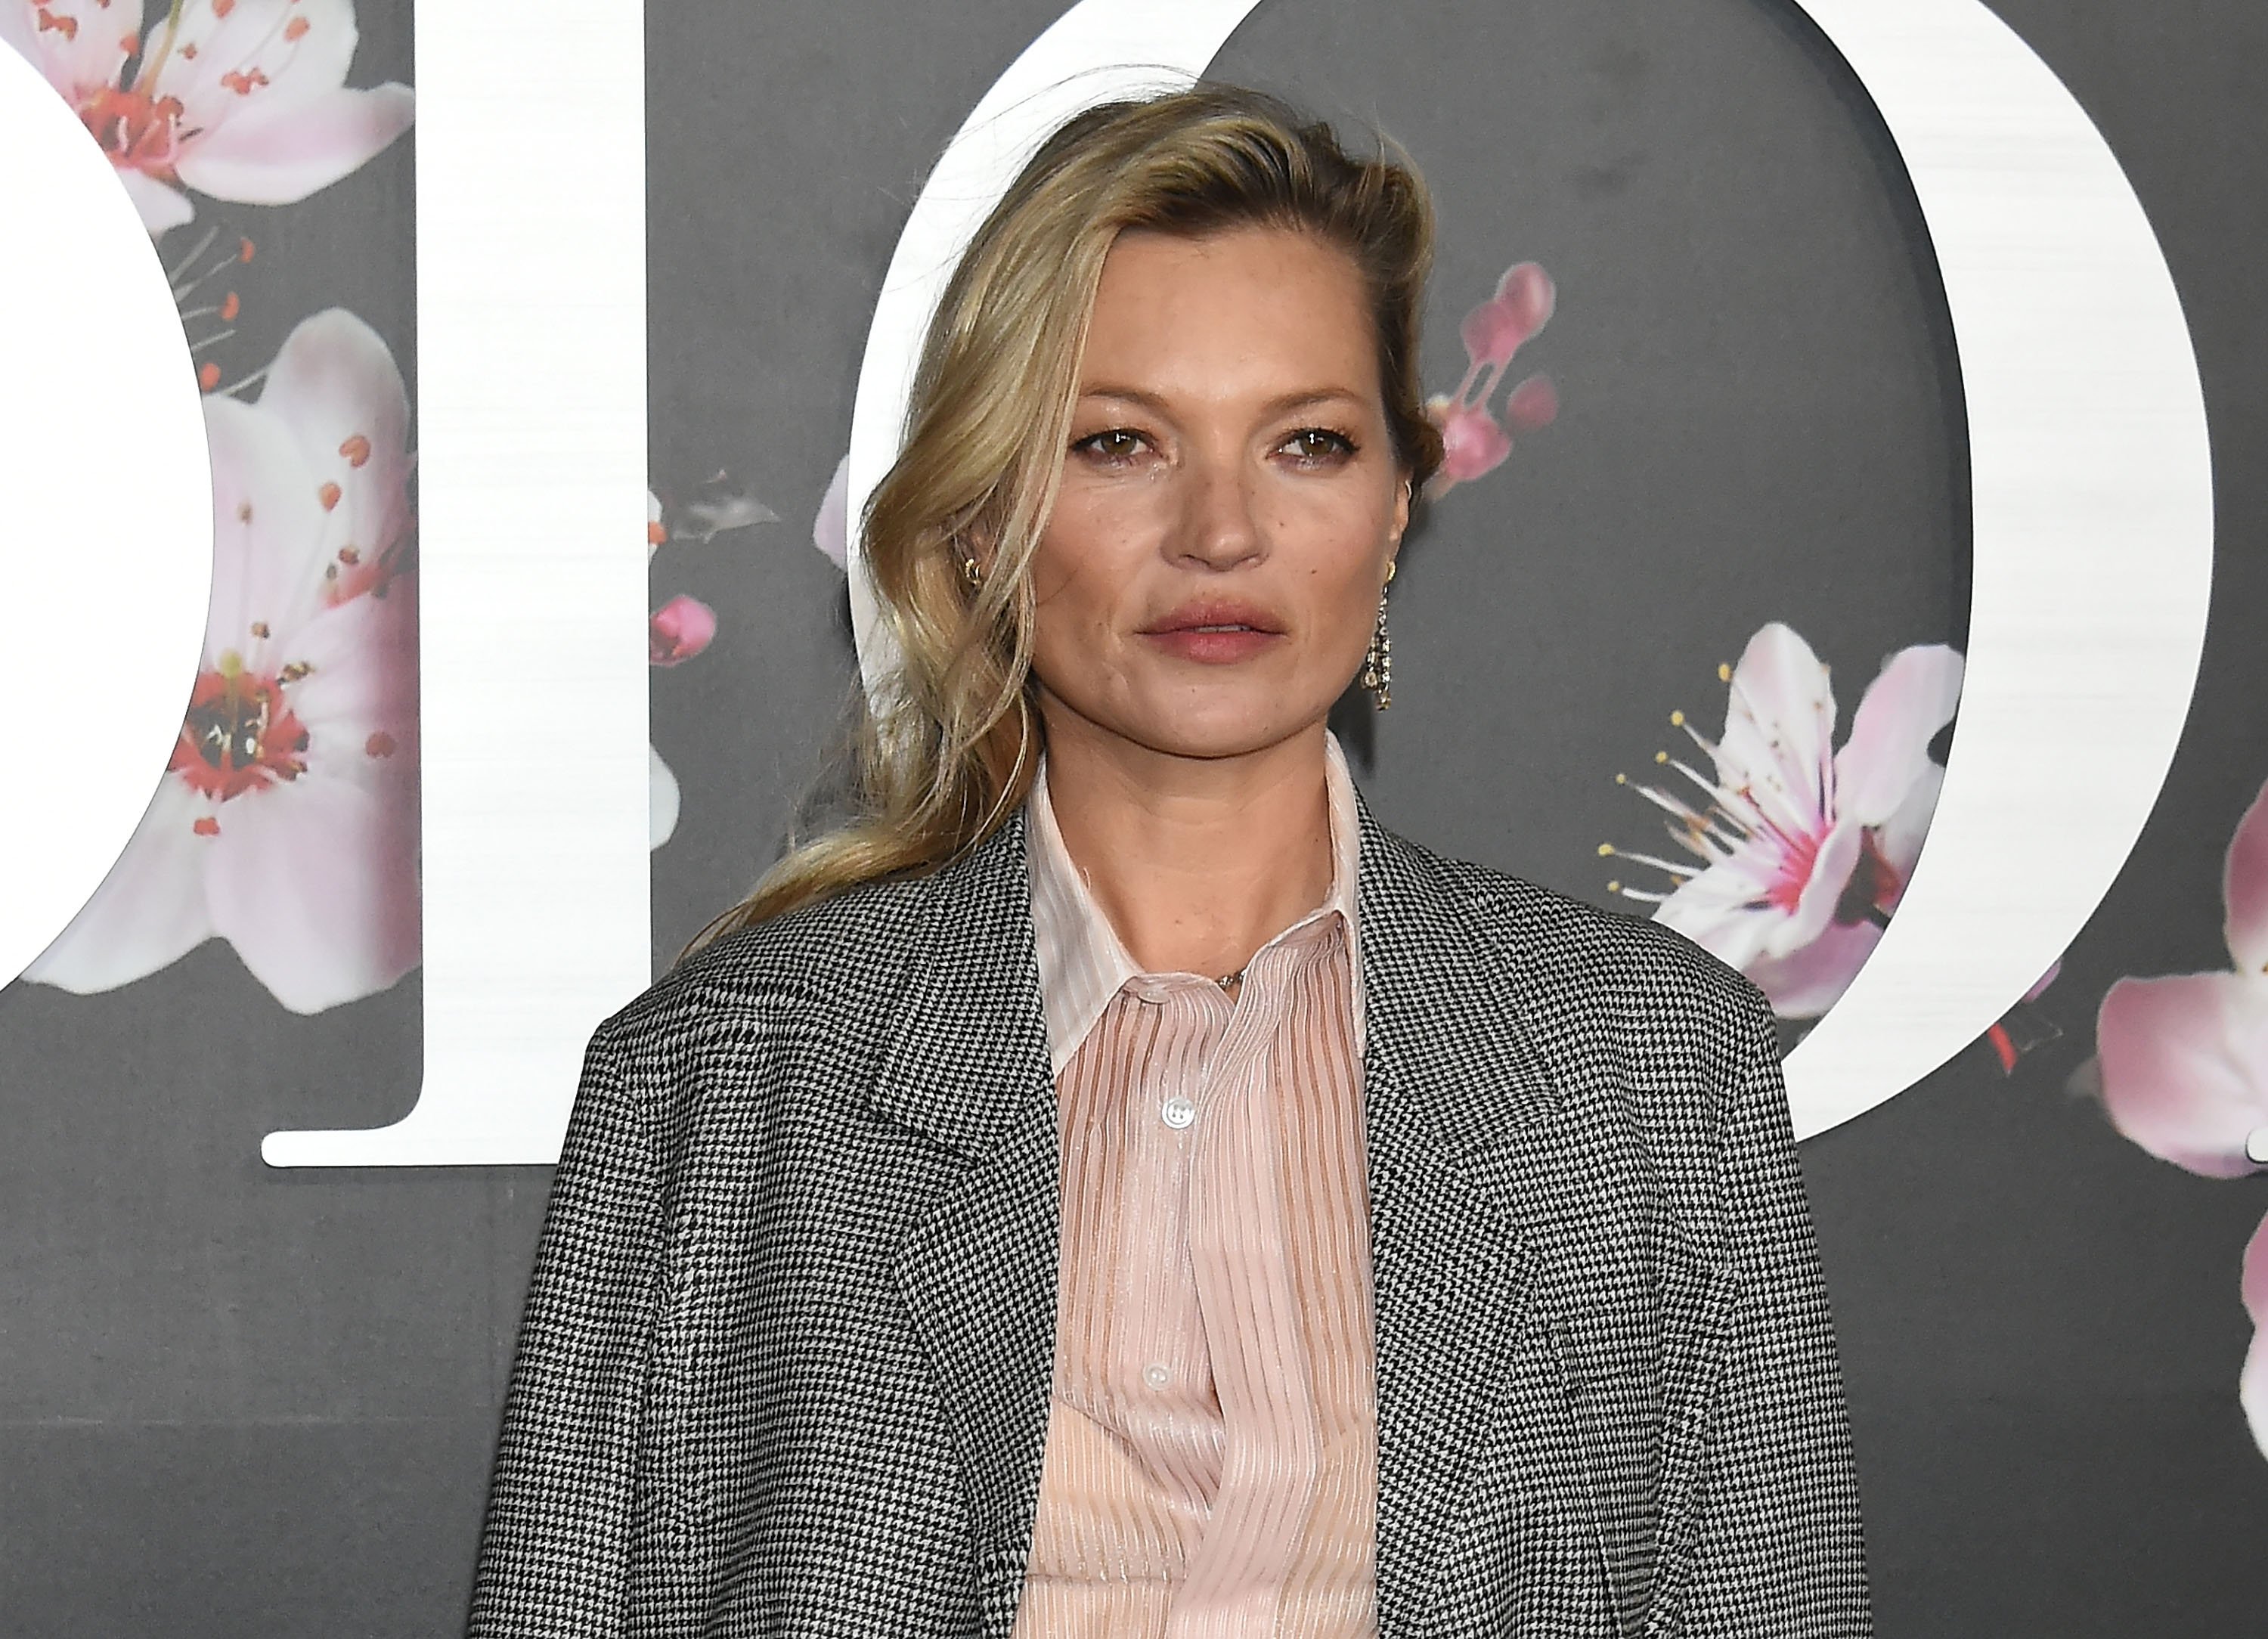 Kate Moss attends the photocall for Dior Pre-Fall 2019 Men's Collection at Telecom Center on November 30, 2018 in Tokyo, Japan. | Source: Getty Images